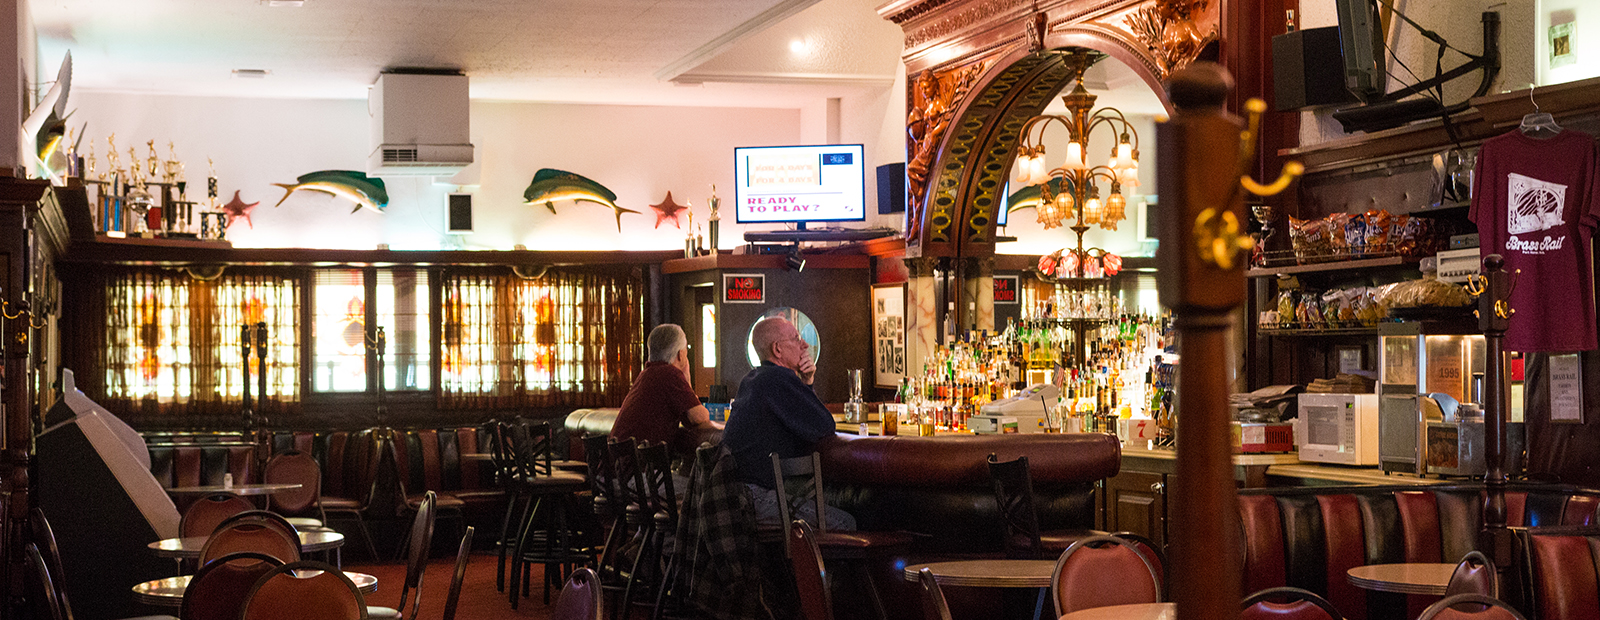 The Brass Rail Bar is an icon in the Port Huron community